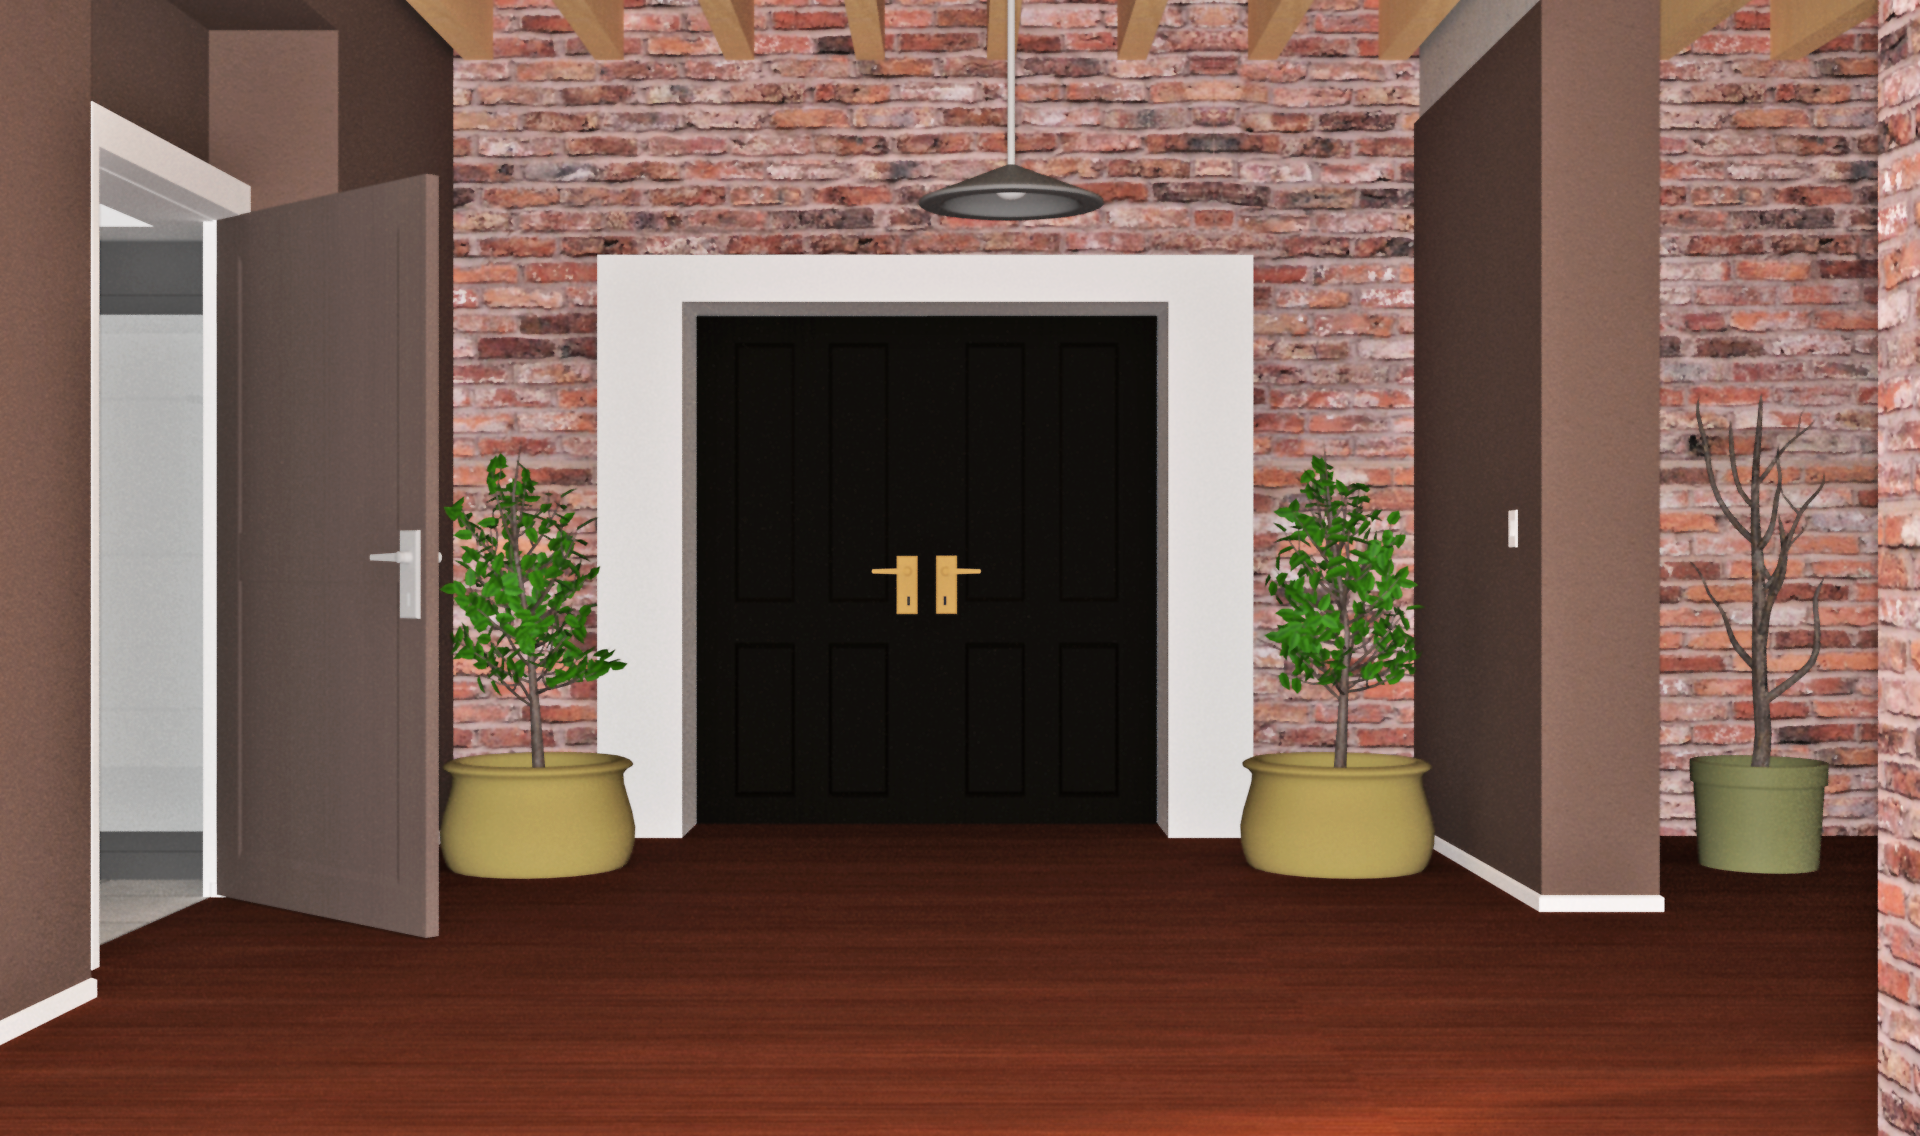 INT. MODERN HOME ENTRANCE 3 – DAY